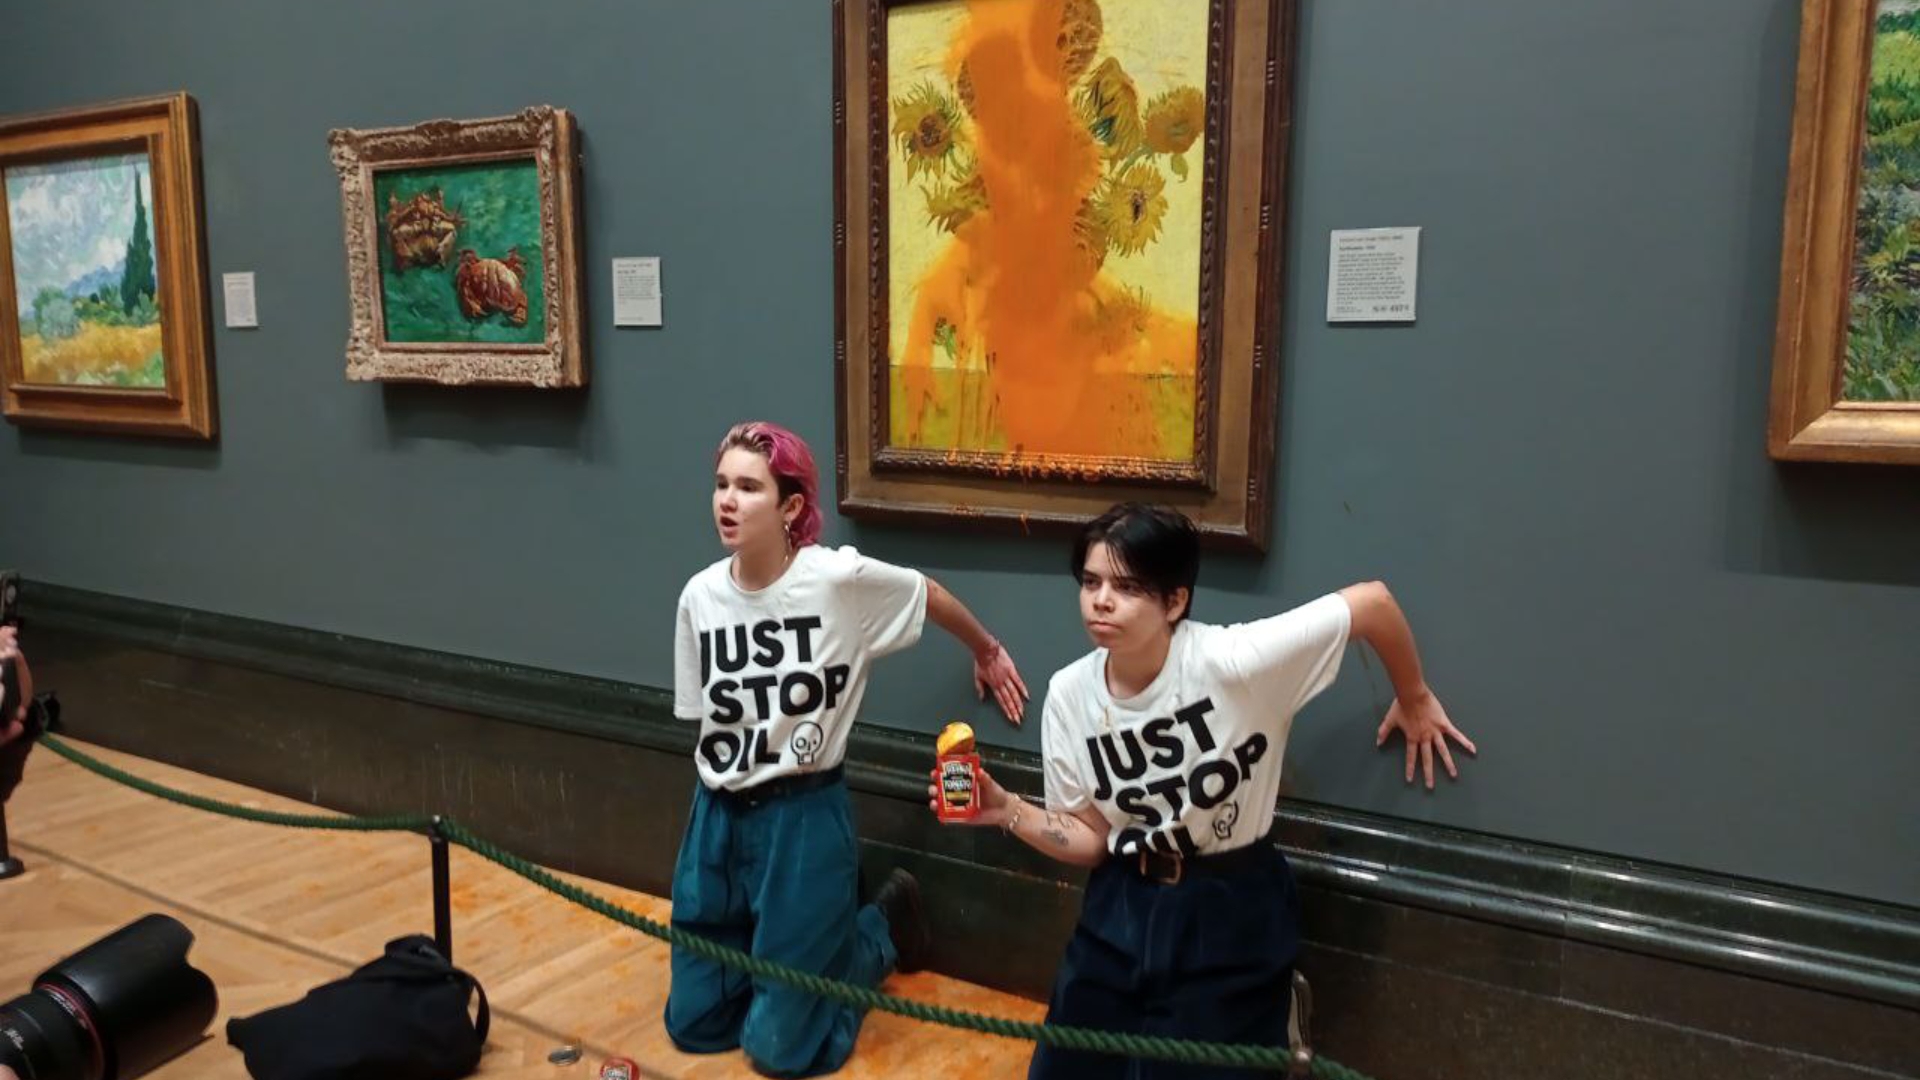 The two women, dressed in Just Stop Oil t-shirts then glued their hands to the space beneath the painting.